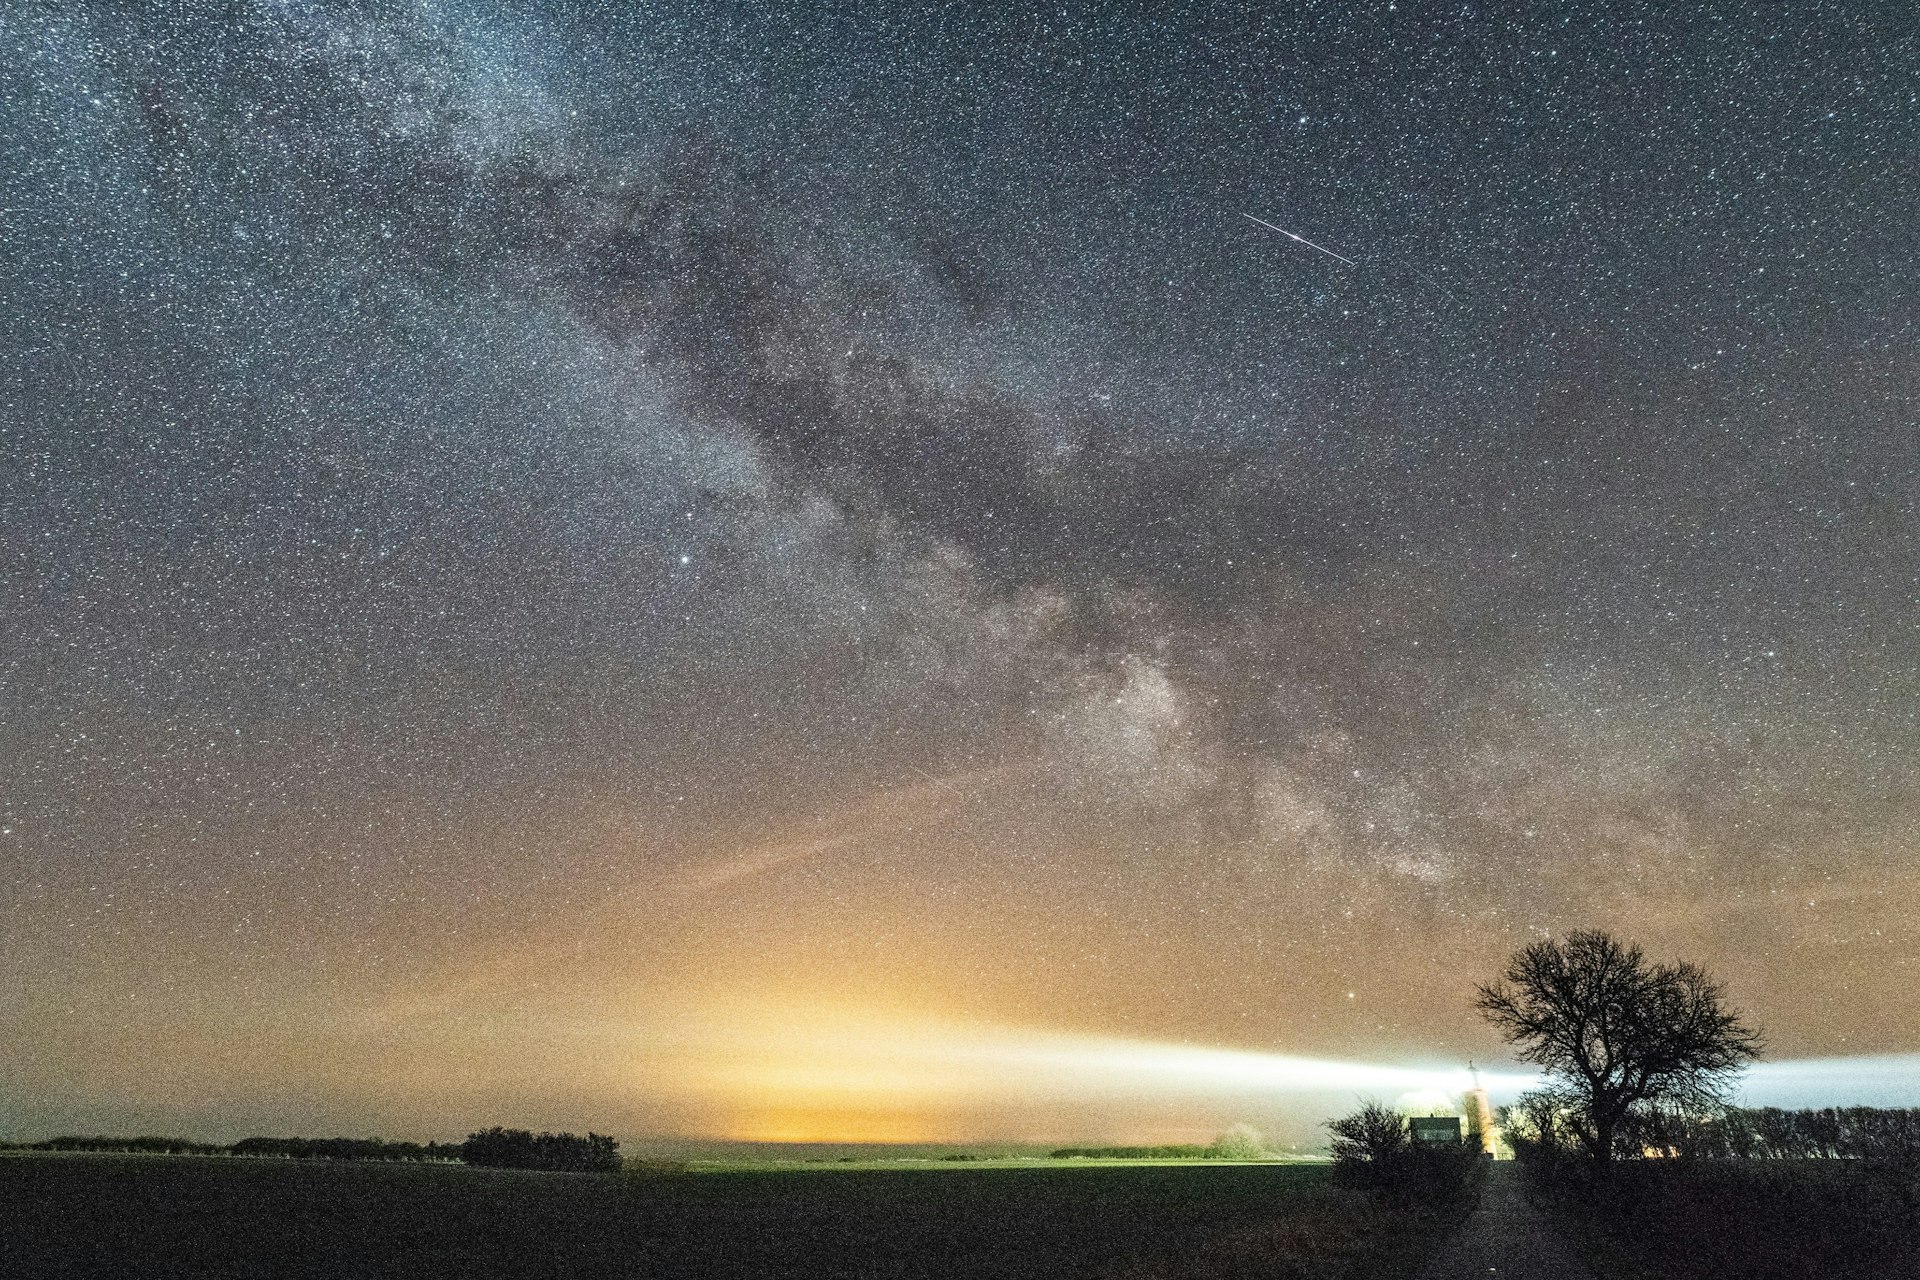 Shooting stars in the sky over Germany